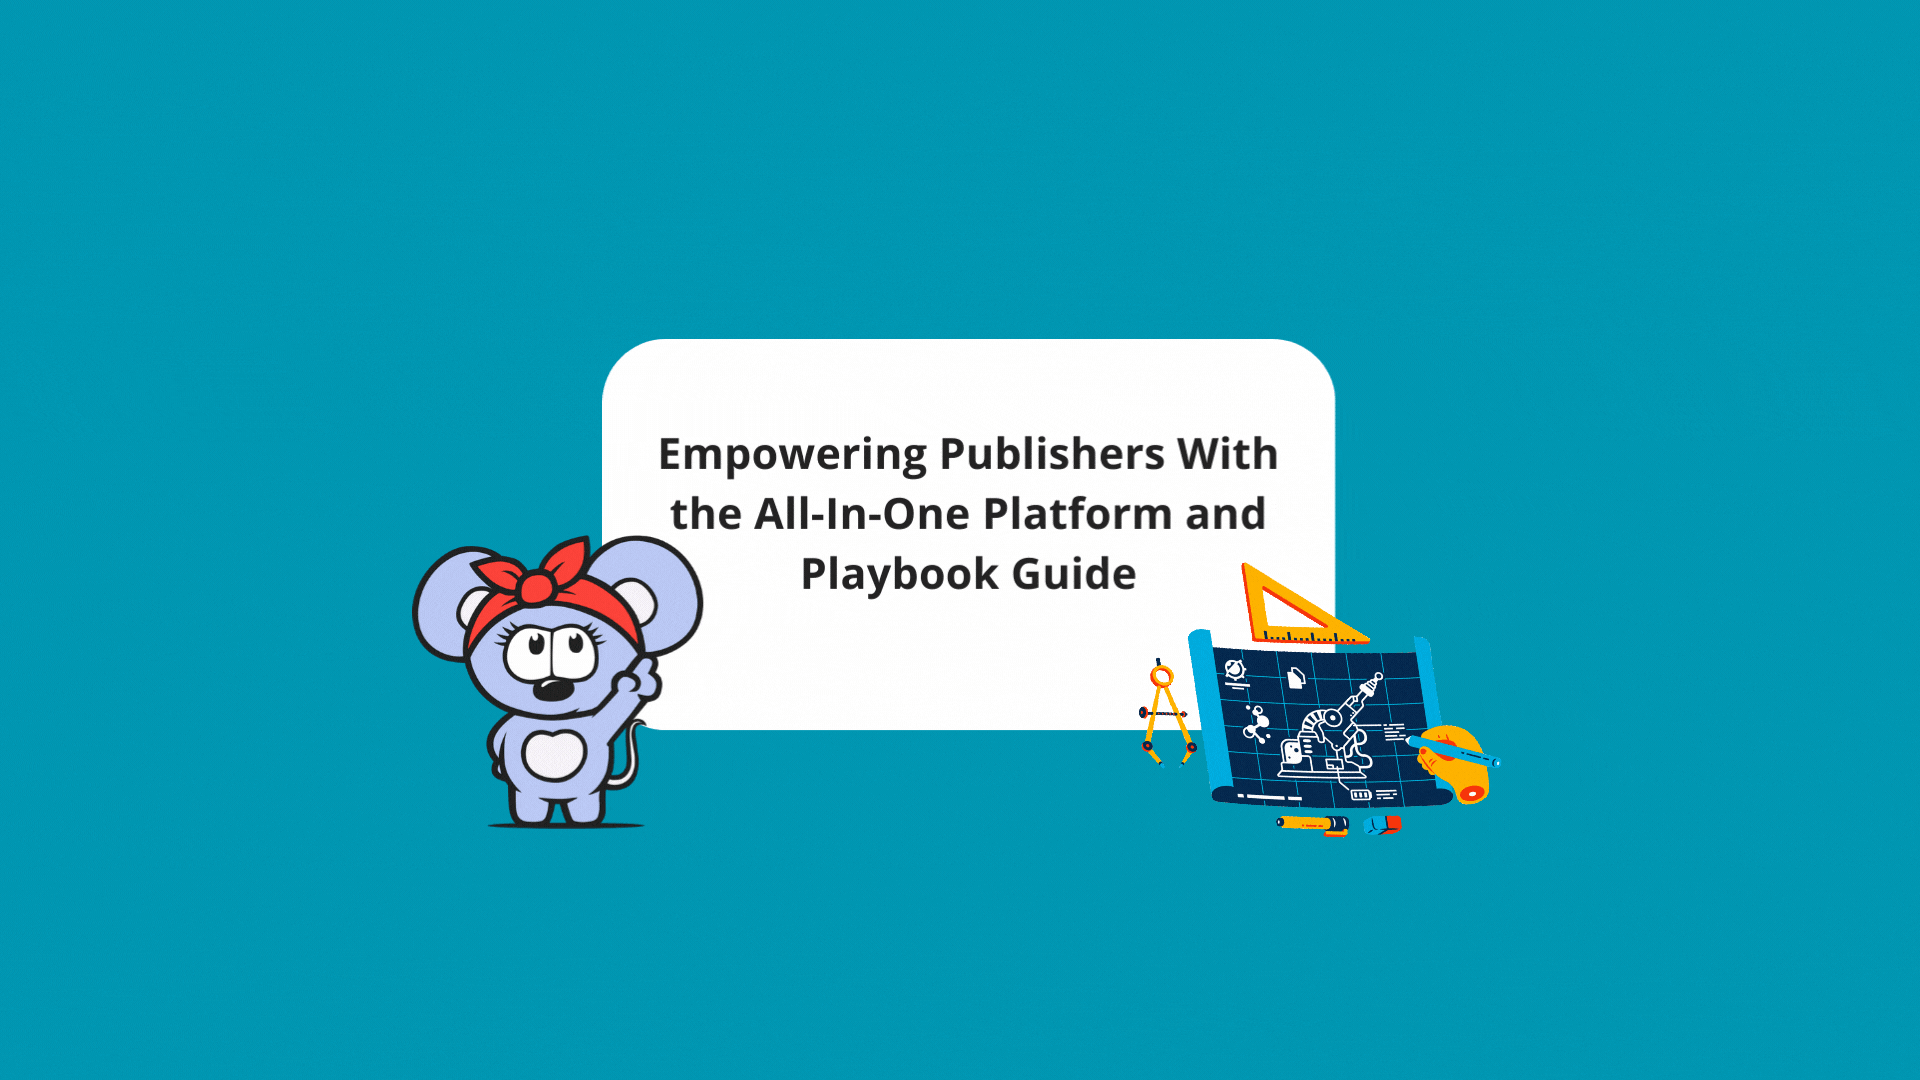 RebelMouse logo directs to article on empowering publishers with platform and playbook guide, accompanied by blueprint GIF